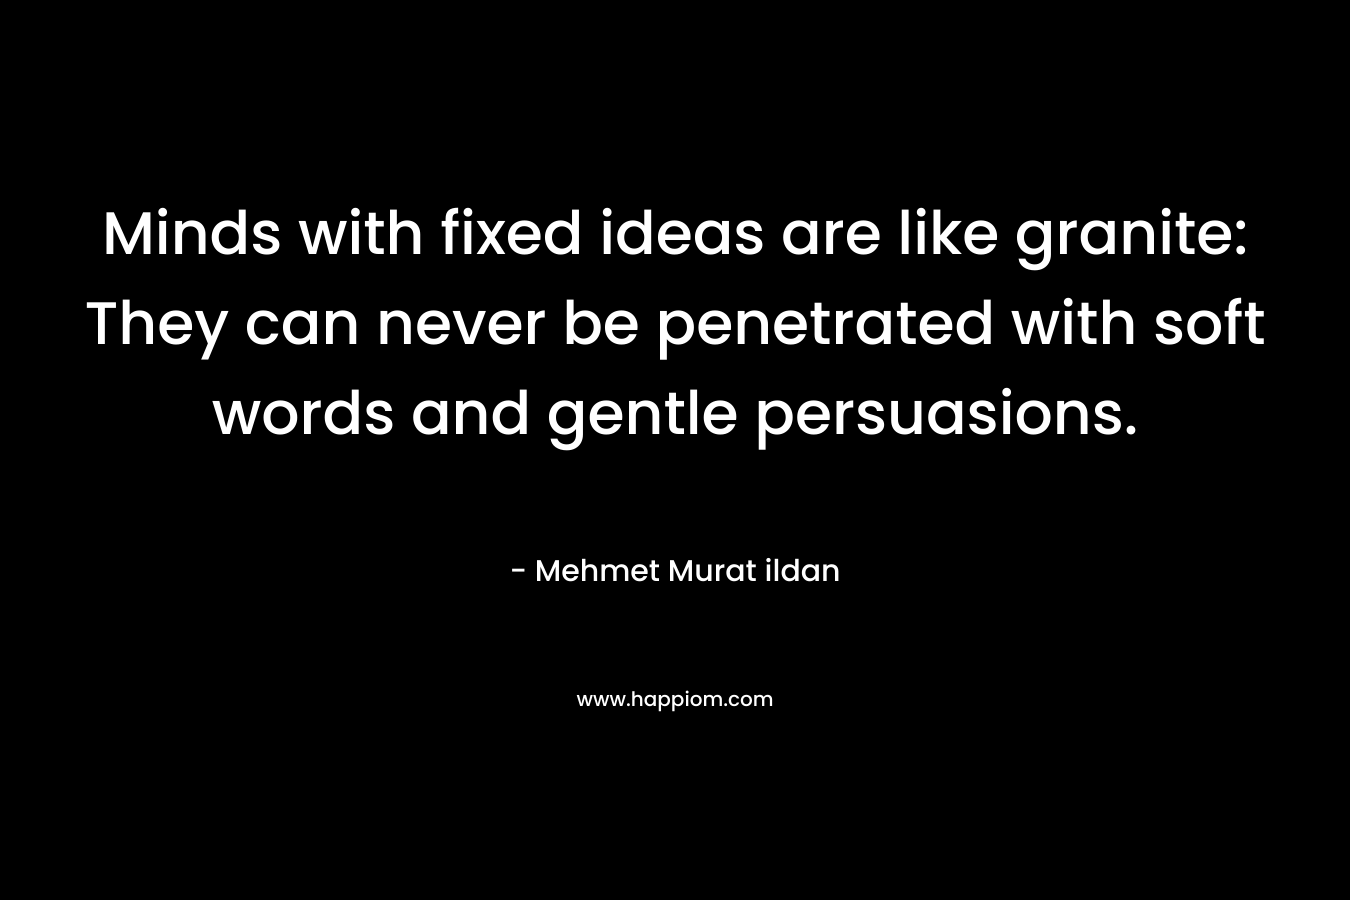 Minds with fixed ideas are like granite: They can never be penetrated with soft words and gentle persuasions.